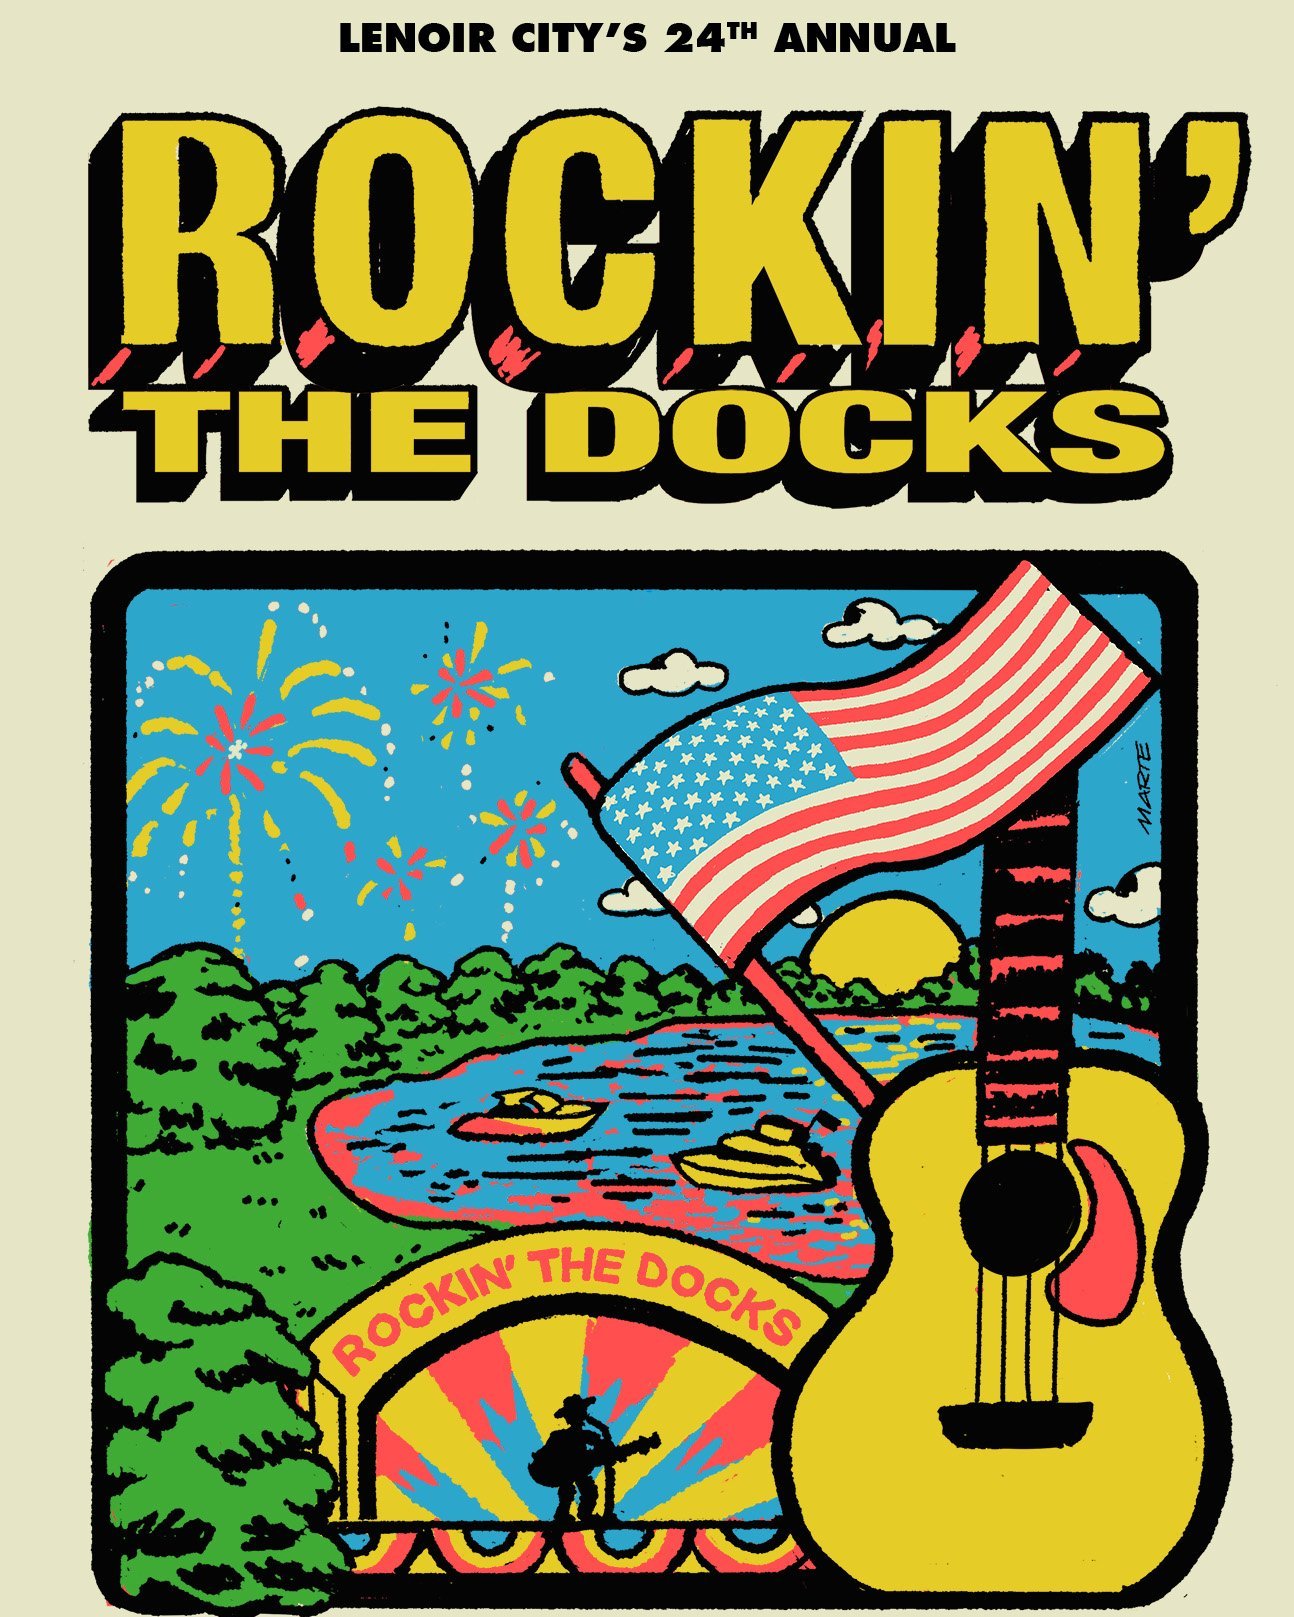 The Ultimate Summer Kick Off!! Lenoir City's 24th Annual Rockin' The Docks Memorial Day celebration is happening May 29th followed by the 4th of July celebration happening June 29th!! Mark your calendars and plan your visit now!

https://www.rockinth